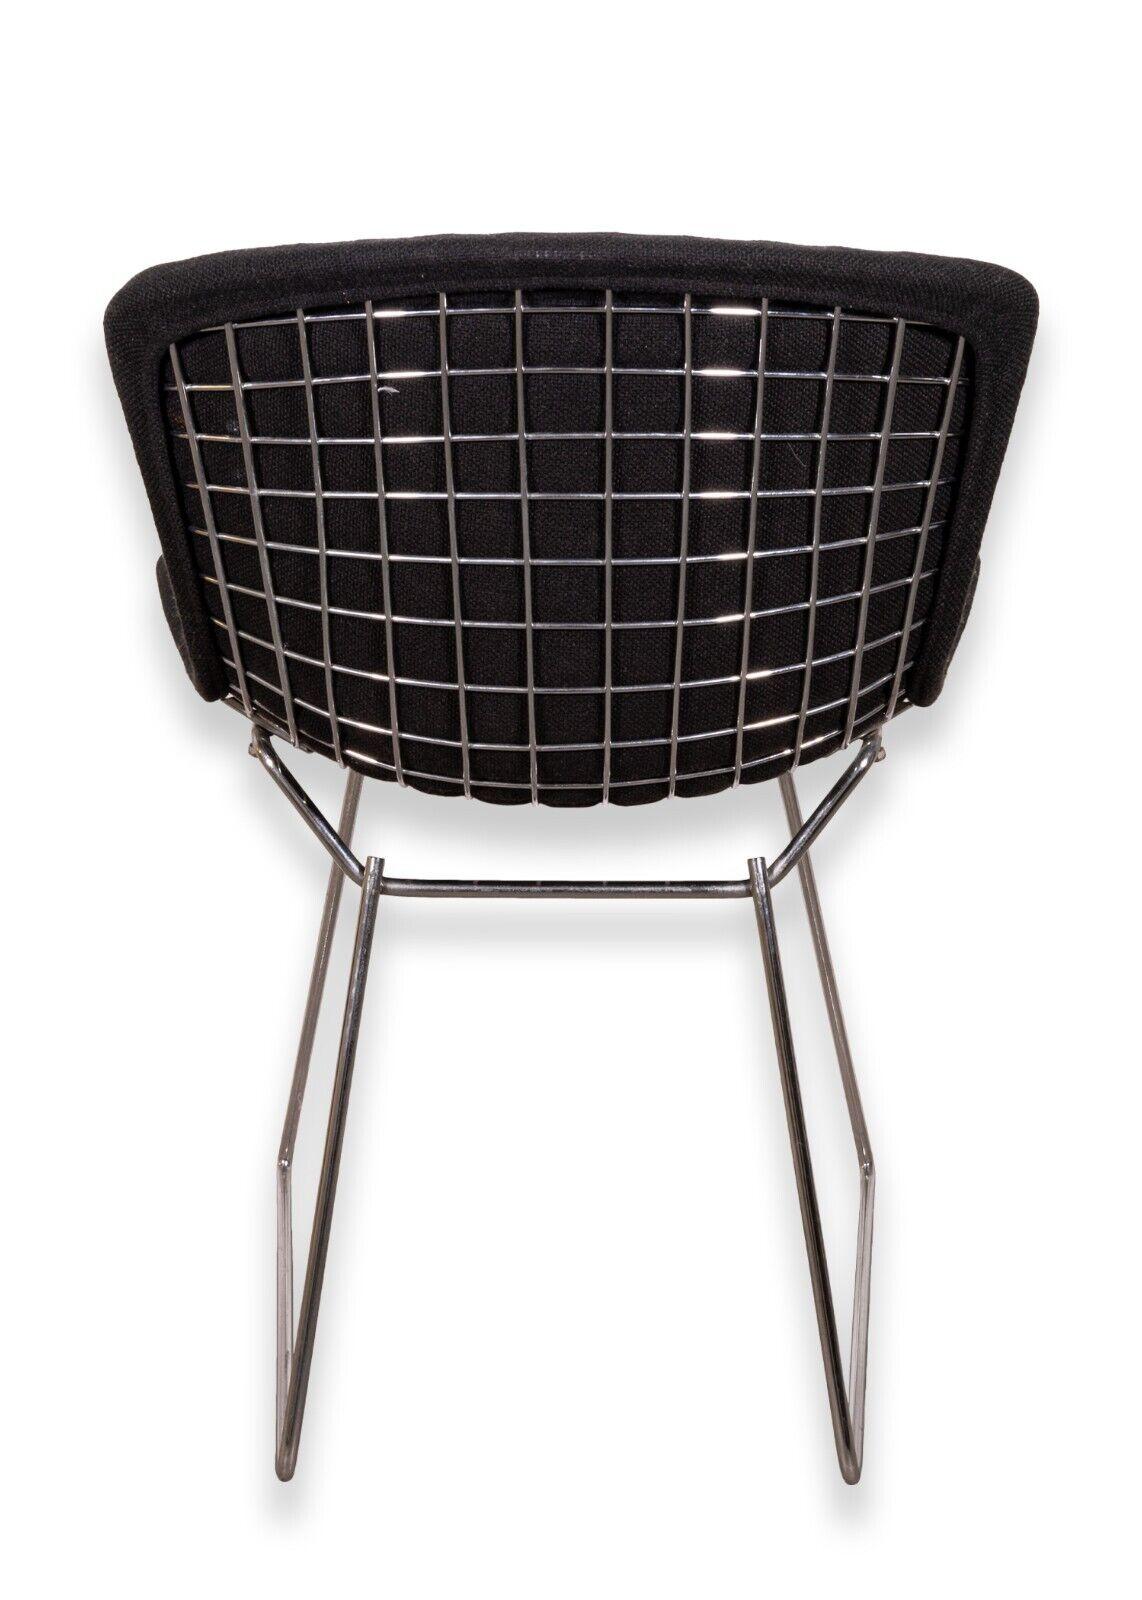 Vintage Mid Century Set of 4 Knoll Bertoia Wire Side Chairs Black Seat Covers In Good Condition In Keego Harbor, MI